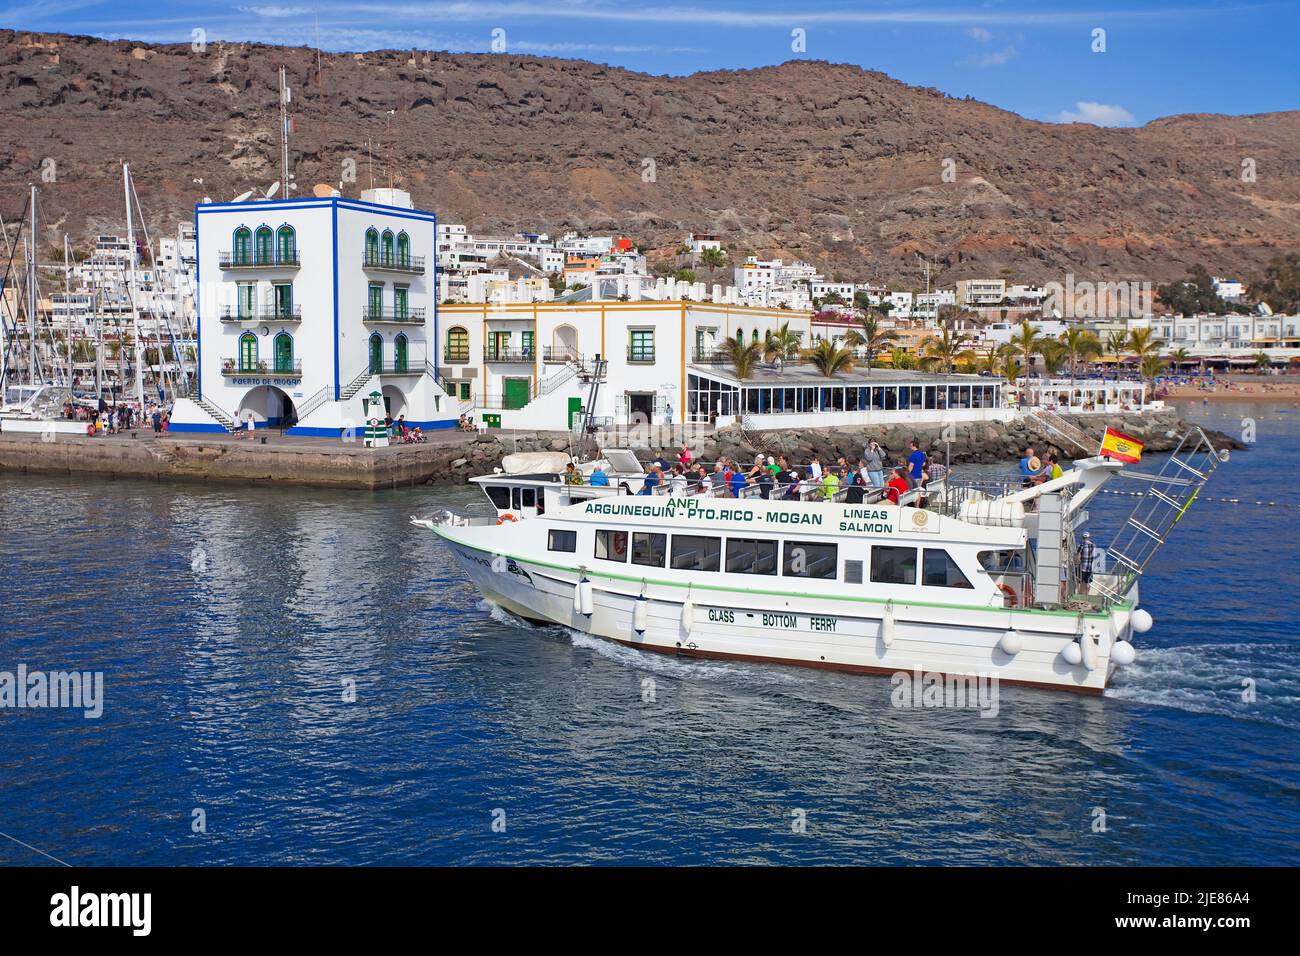 Sightseeing, tourist boat at the harbour entrance of Puerto de Mogan, Grand Canary, Canary islands, Spain, Europe Stock Photo